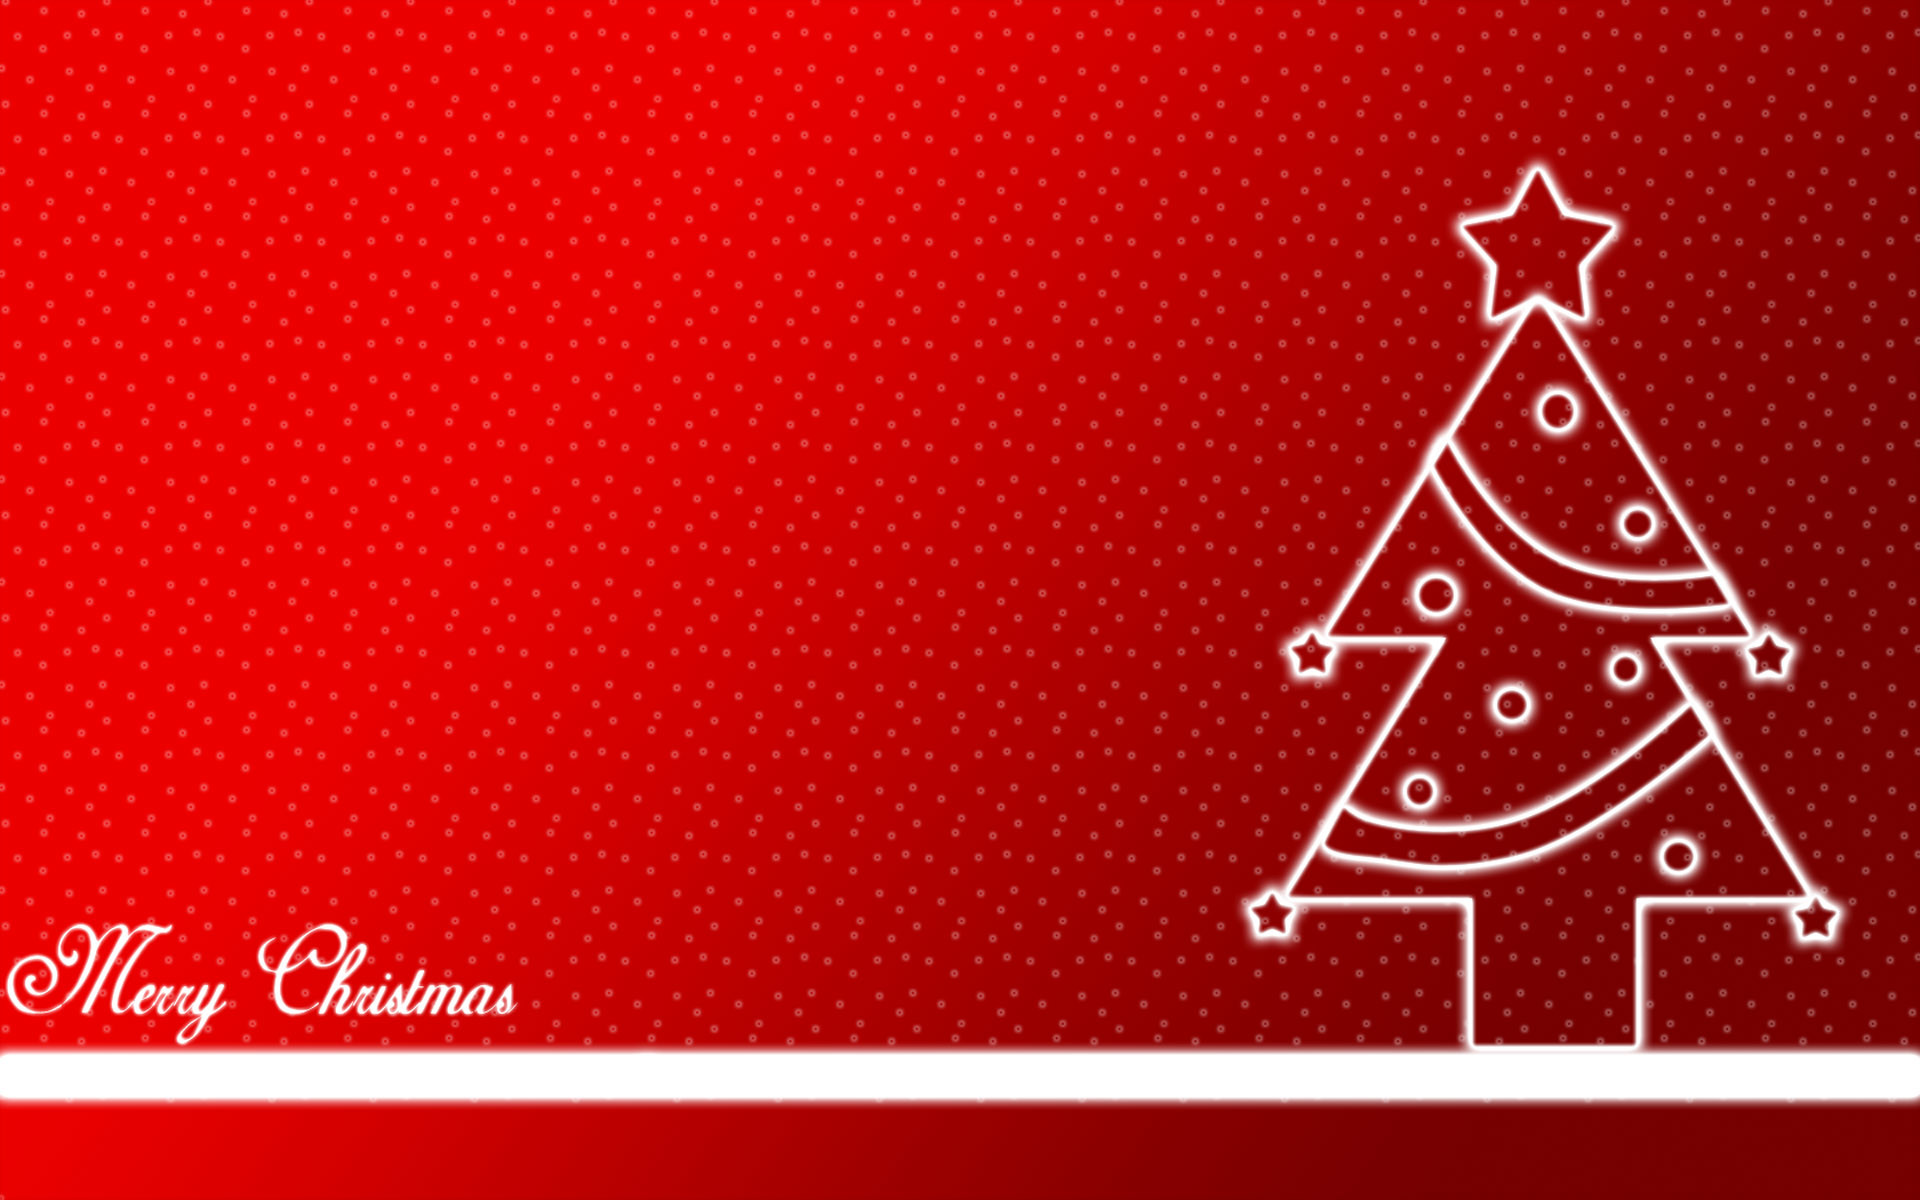 1920x1200 Merry Christmas Wallpaper Red 2016 for PC.